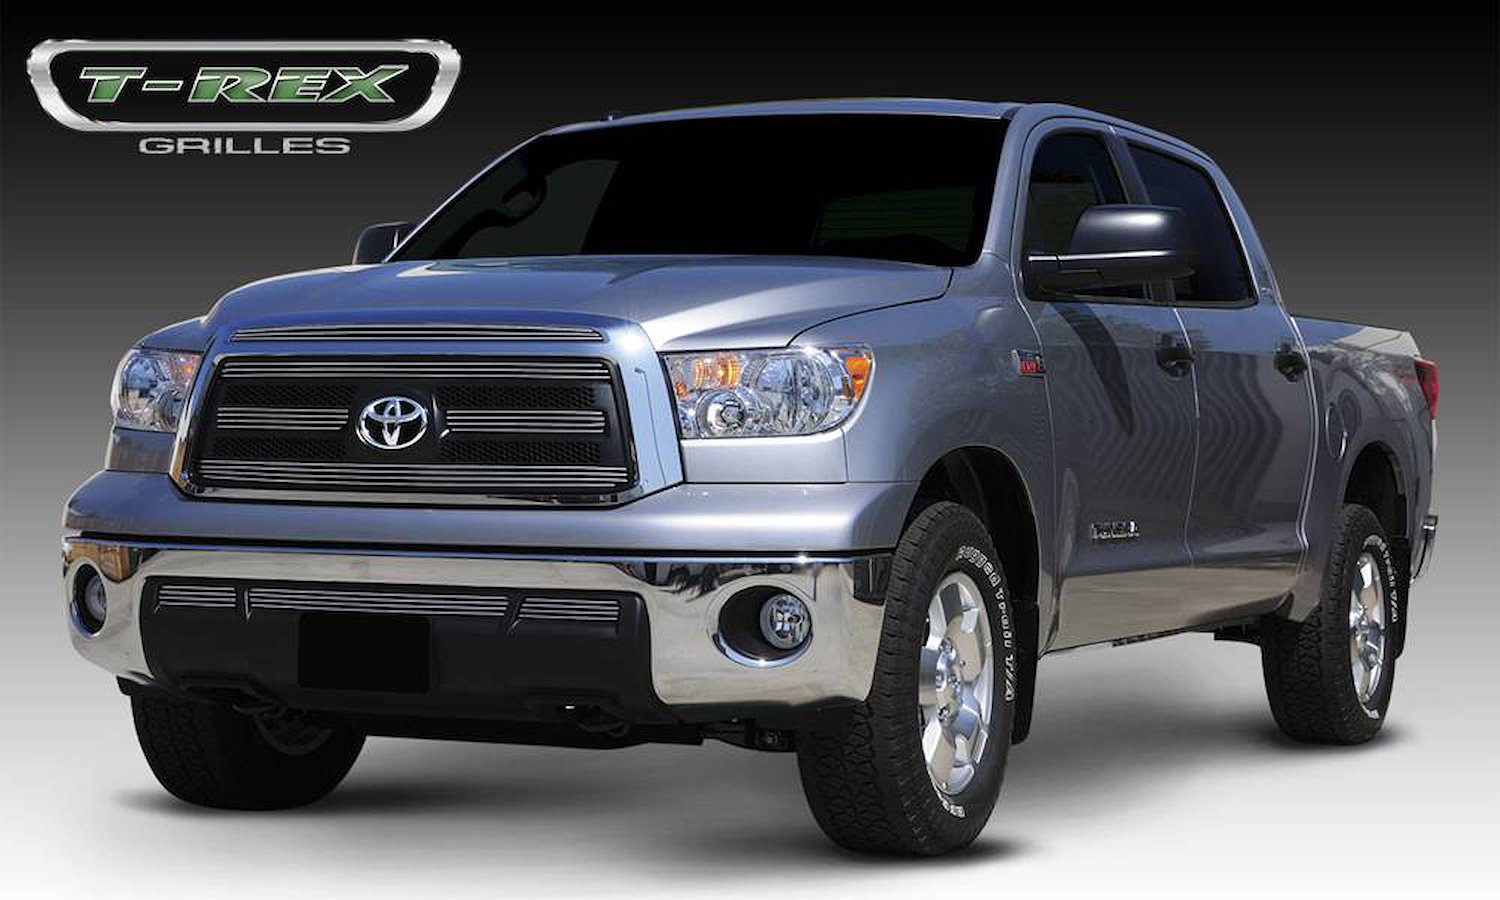 T Rex Grilles 21961 Billet Grille Overlay 2010 2012 Toyota Tundra Except Limited And Platinum Jegs